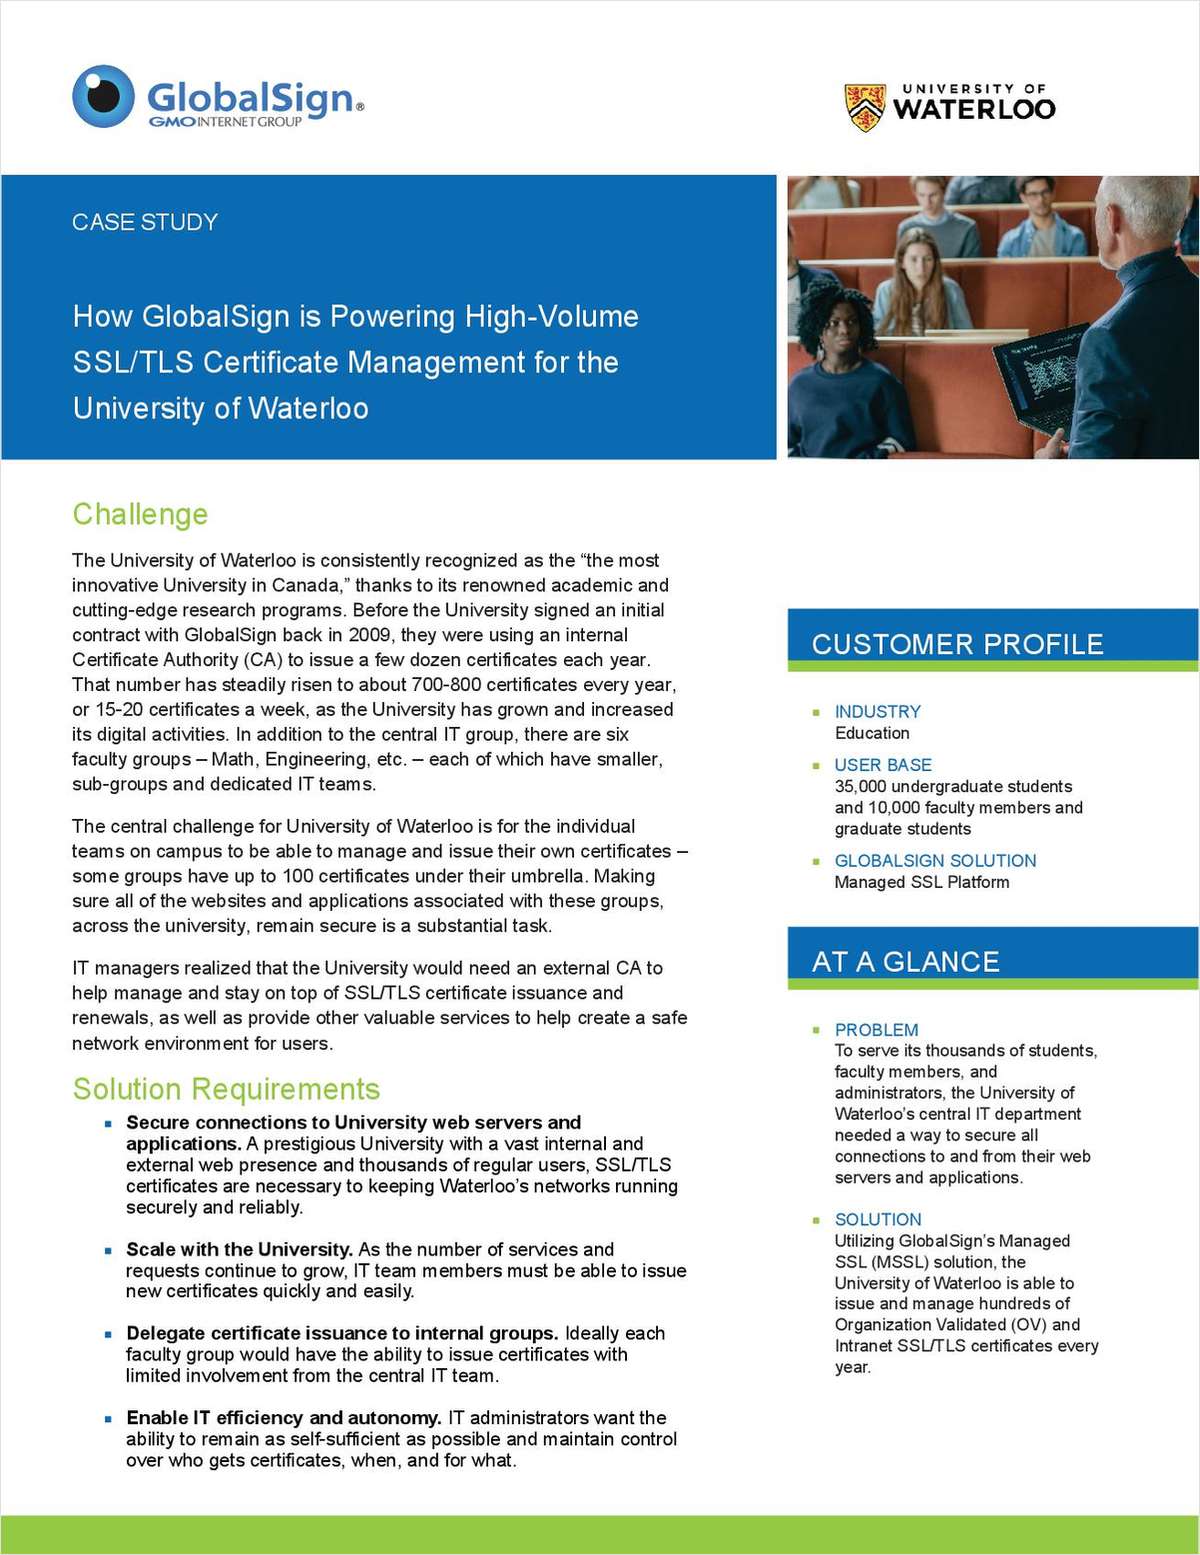 How GlobalSign is Powering High-Volume SSL/TLS Certificate Management for the University of Waterloo